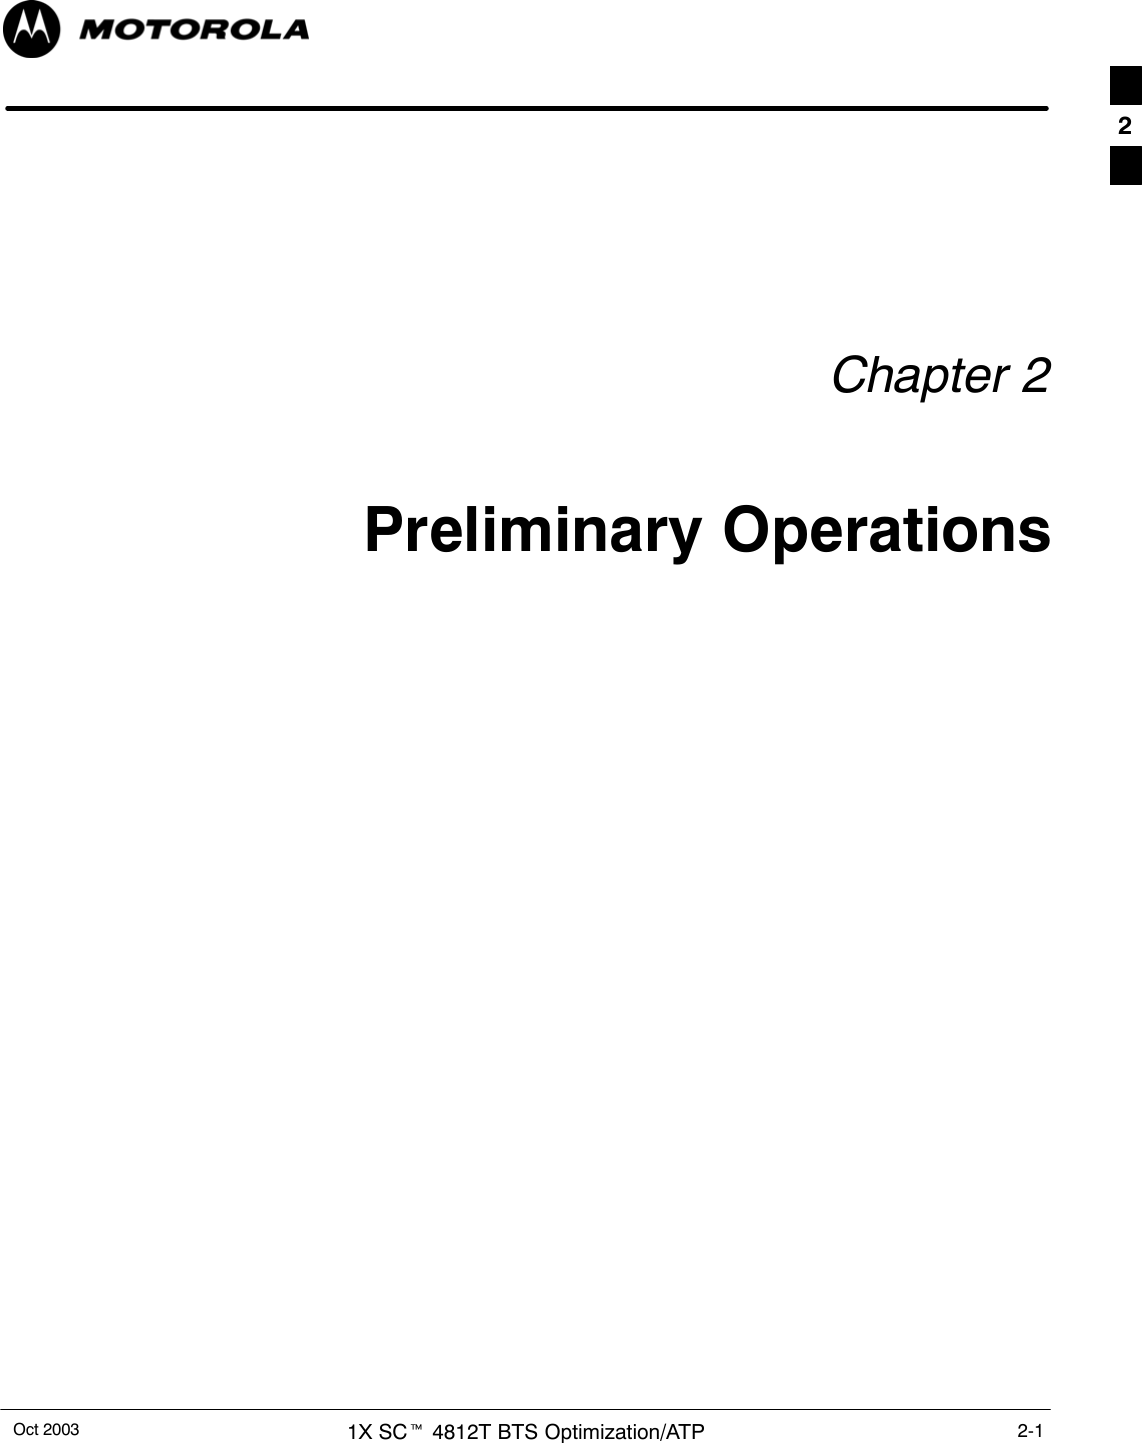 Oct 2003 1X SCt 4812T BTS Optimization/ATP 2-1Chapter 2Preliminary Operations2